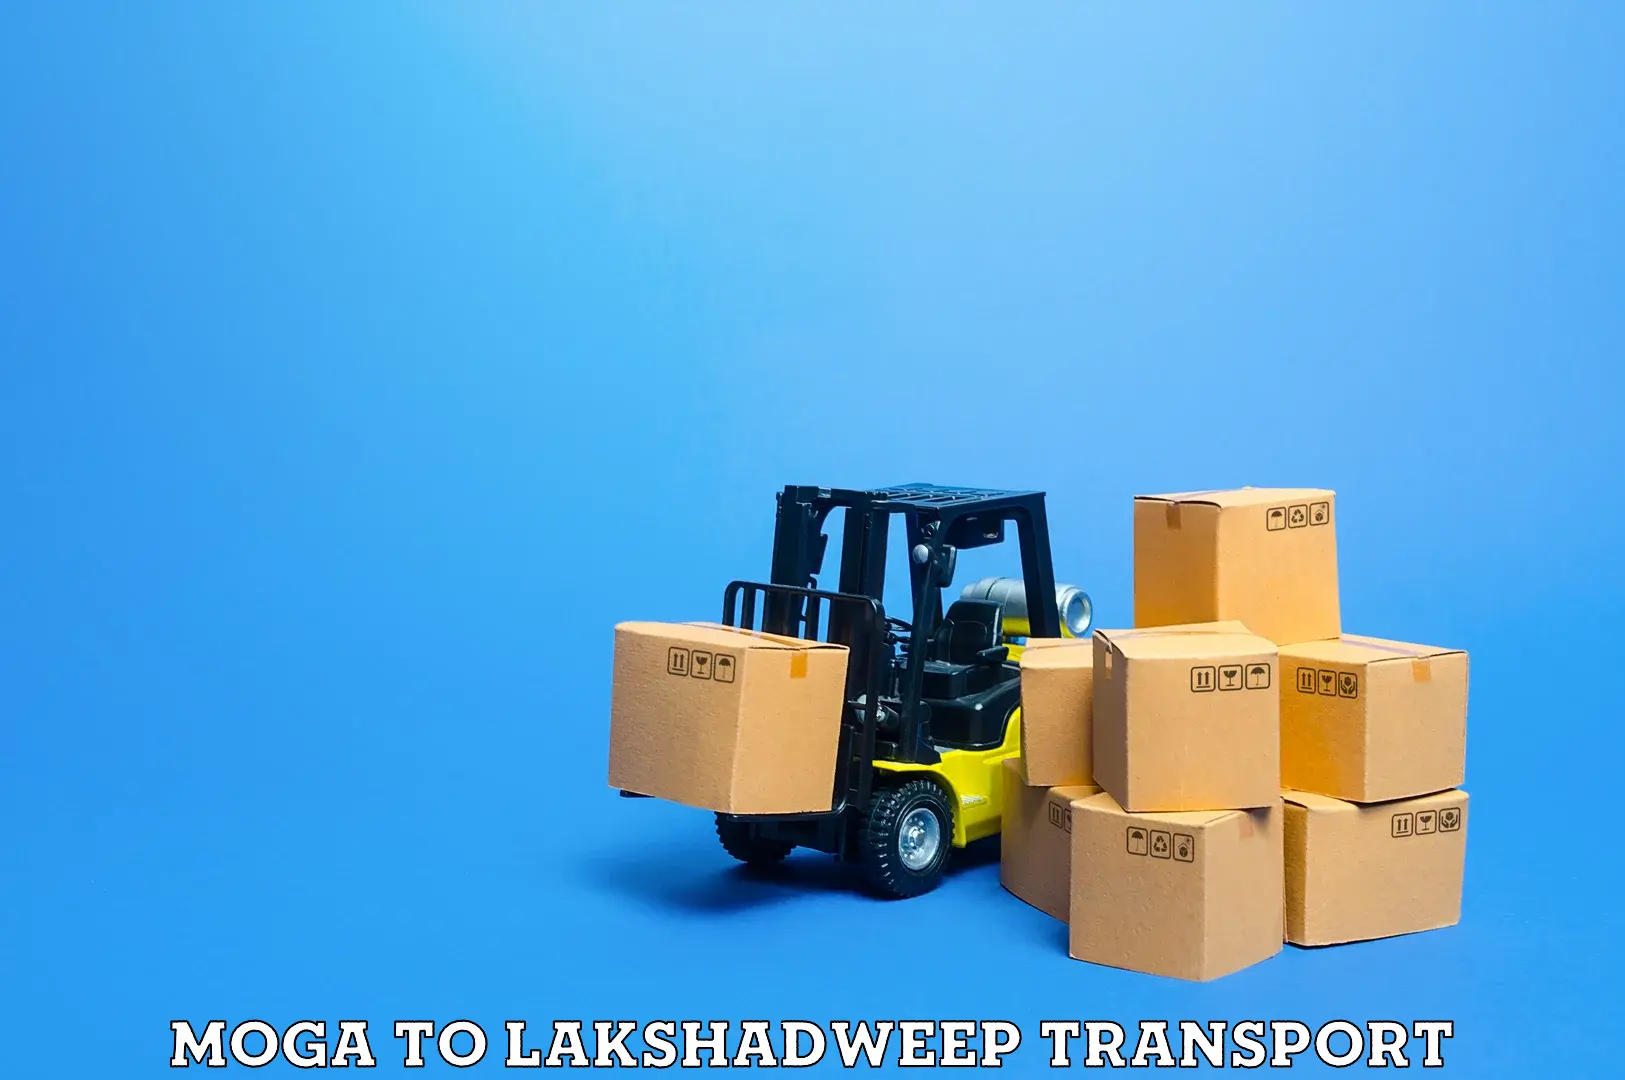 Nationwide transport services Moga to Lakshadweep